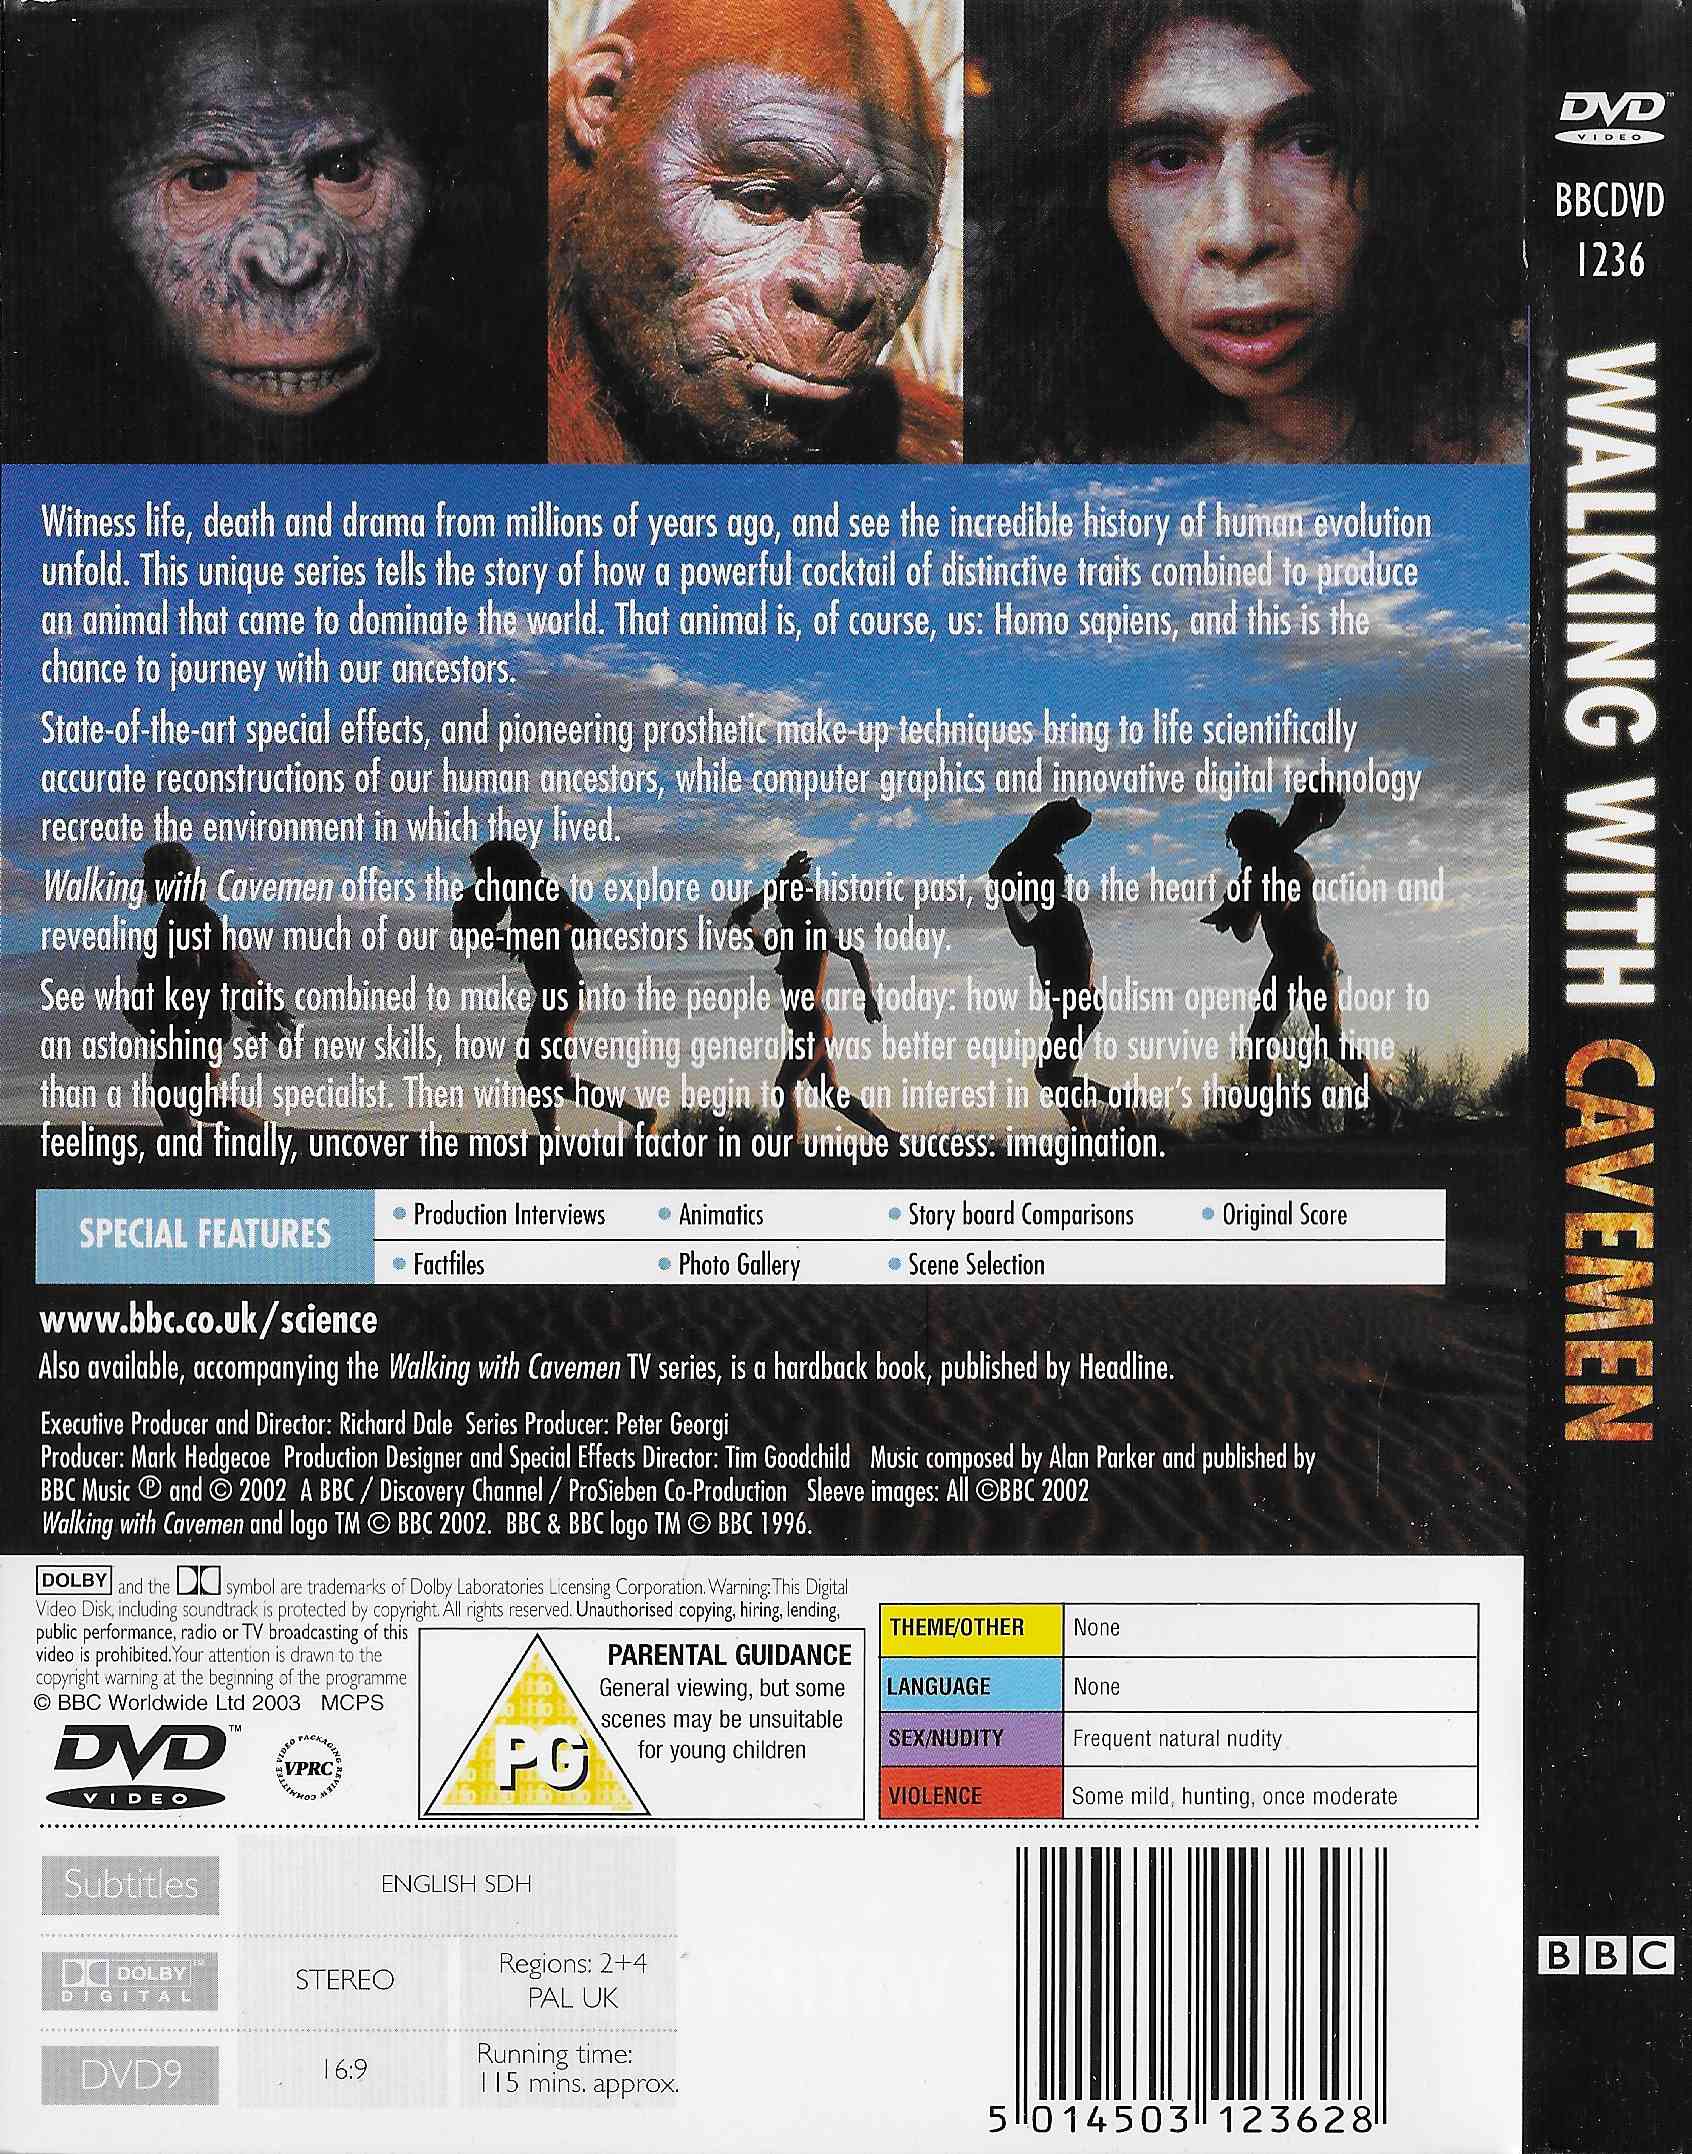 Picture of BBCDVD 1236 Walking with cavemen by artist Unknown from the BBC records and Tapes library